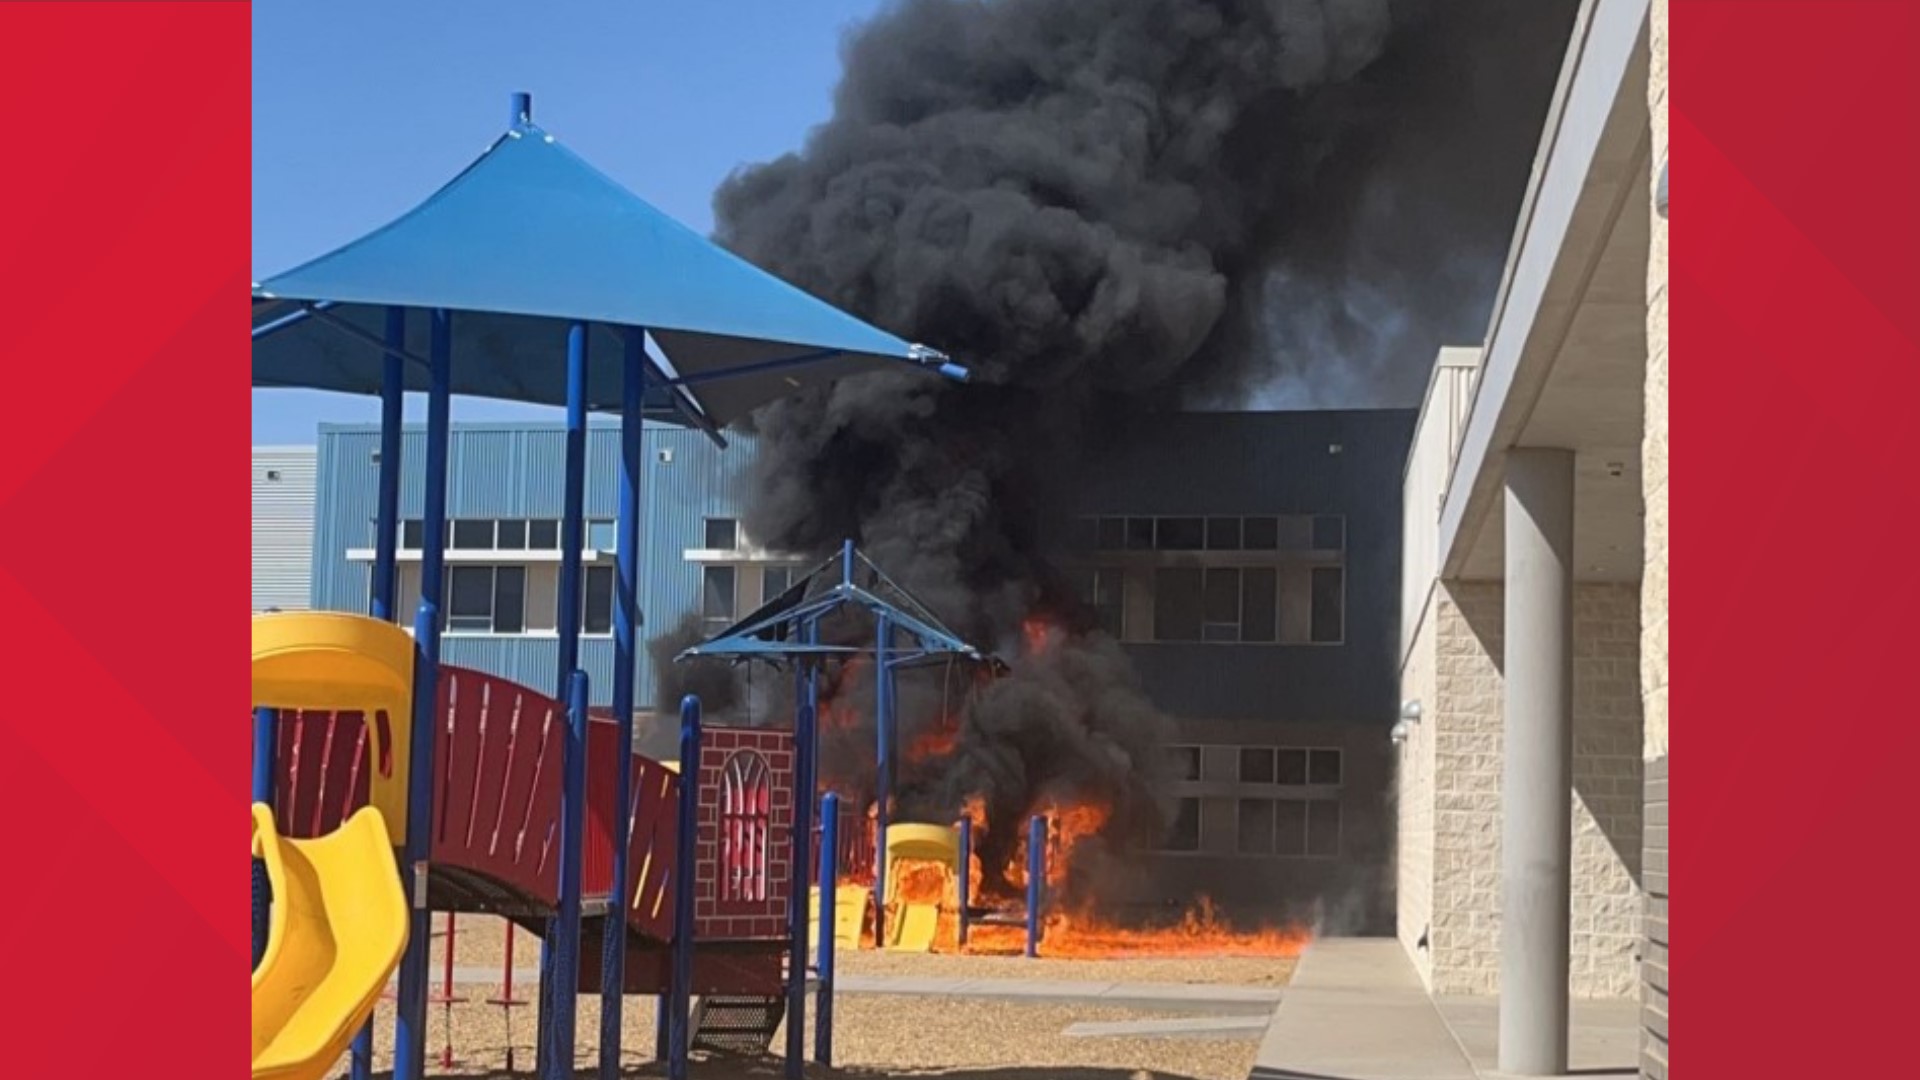 No one was injured after the playground on the school caught fire Wednesday afternoon.